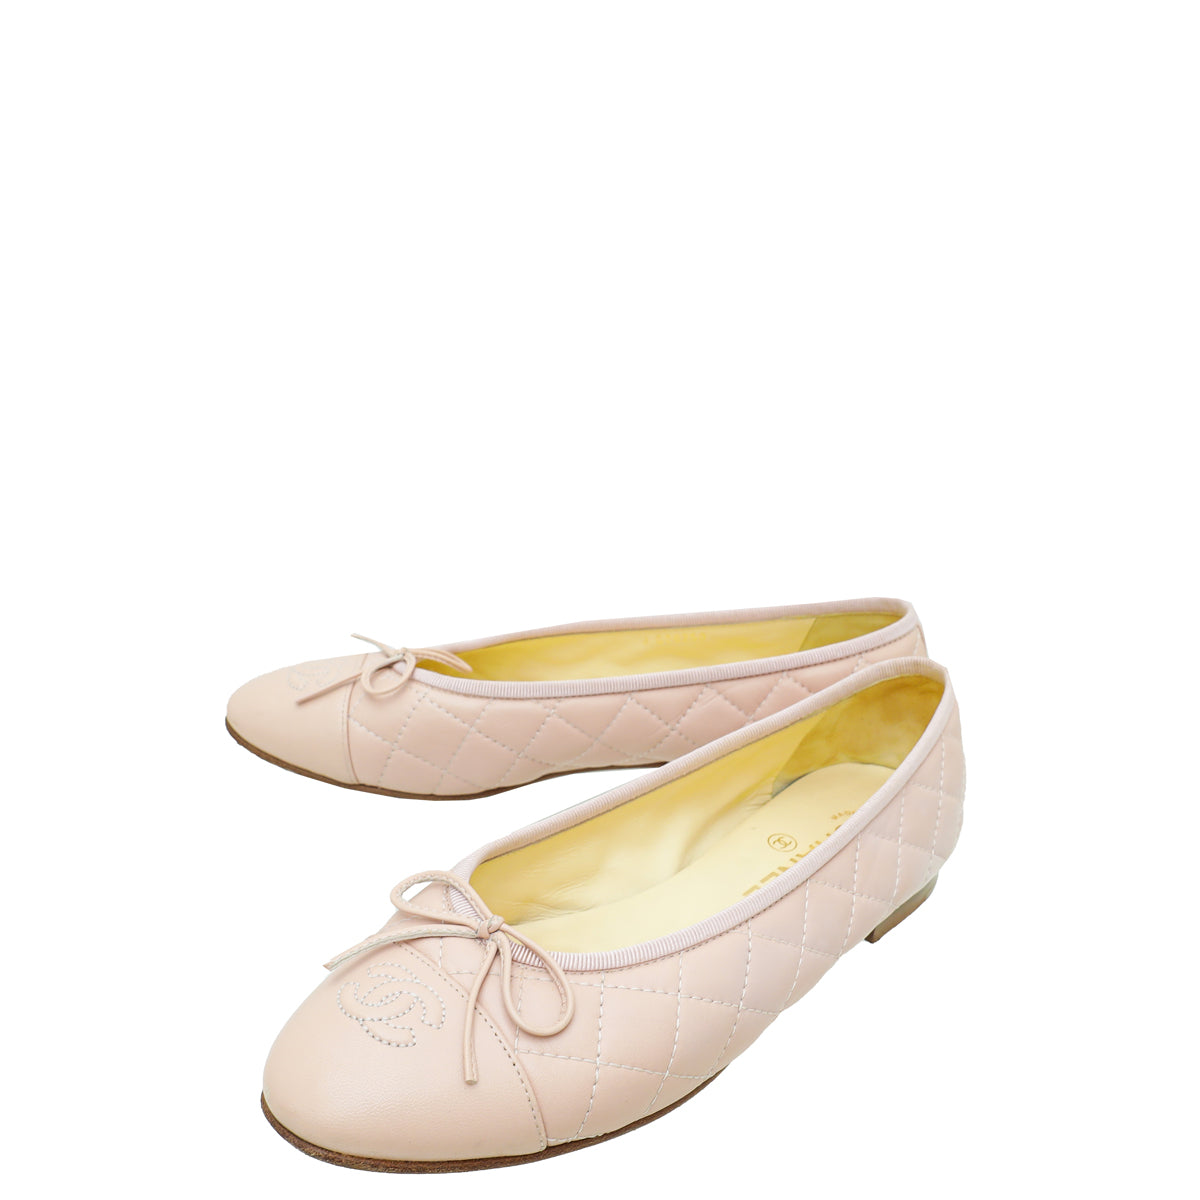 Chanel Light Pink CC Quilted Ballerina Flats 38.5